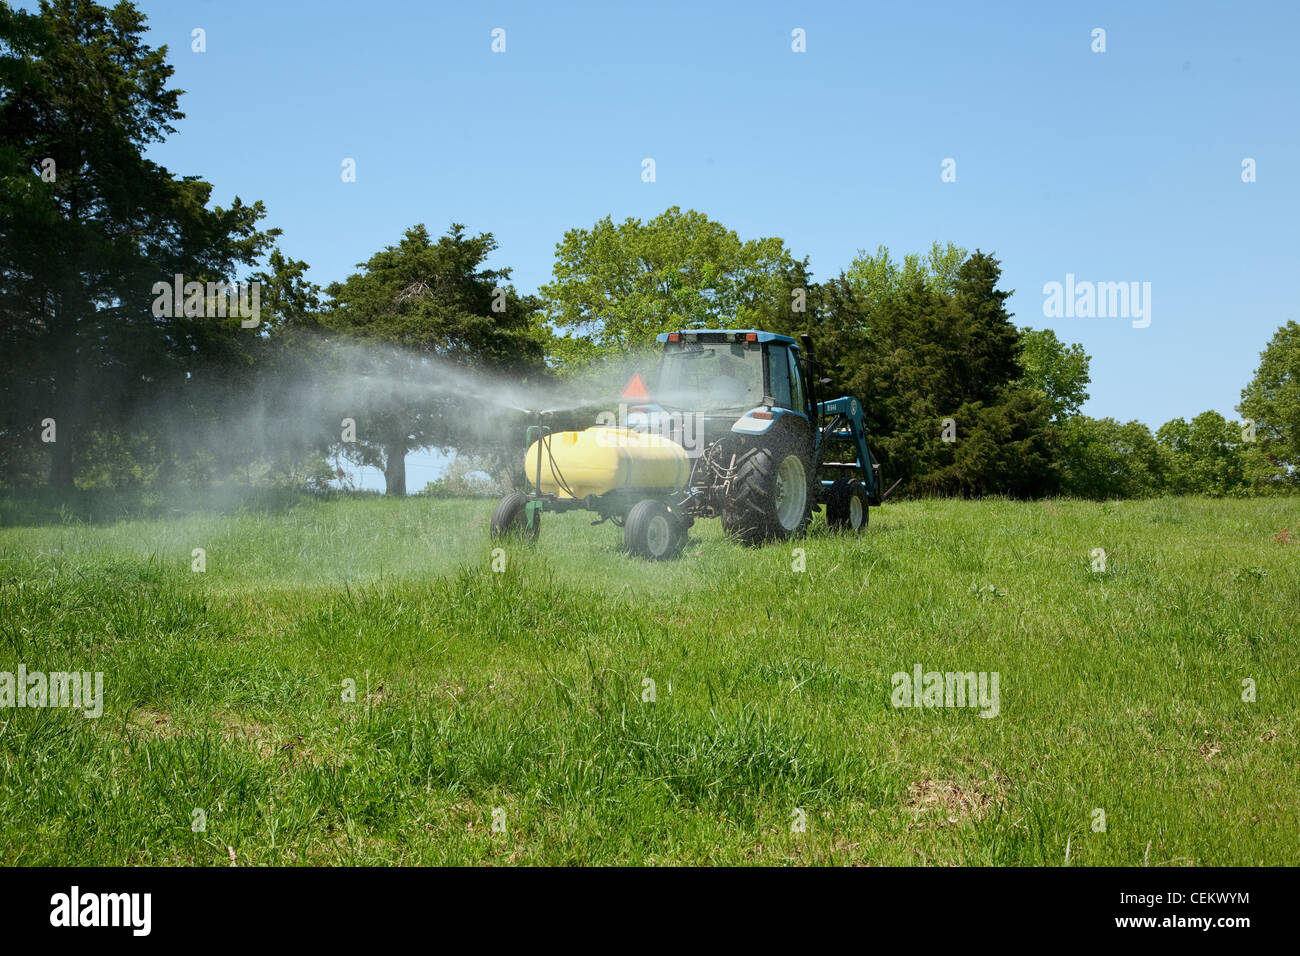 Spraying herbicide on a pasture used for grazing beef cattle. The herbicide is to control broadleaf weeds / Arkansas, USA. Stock Photo